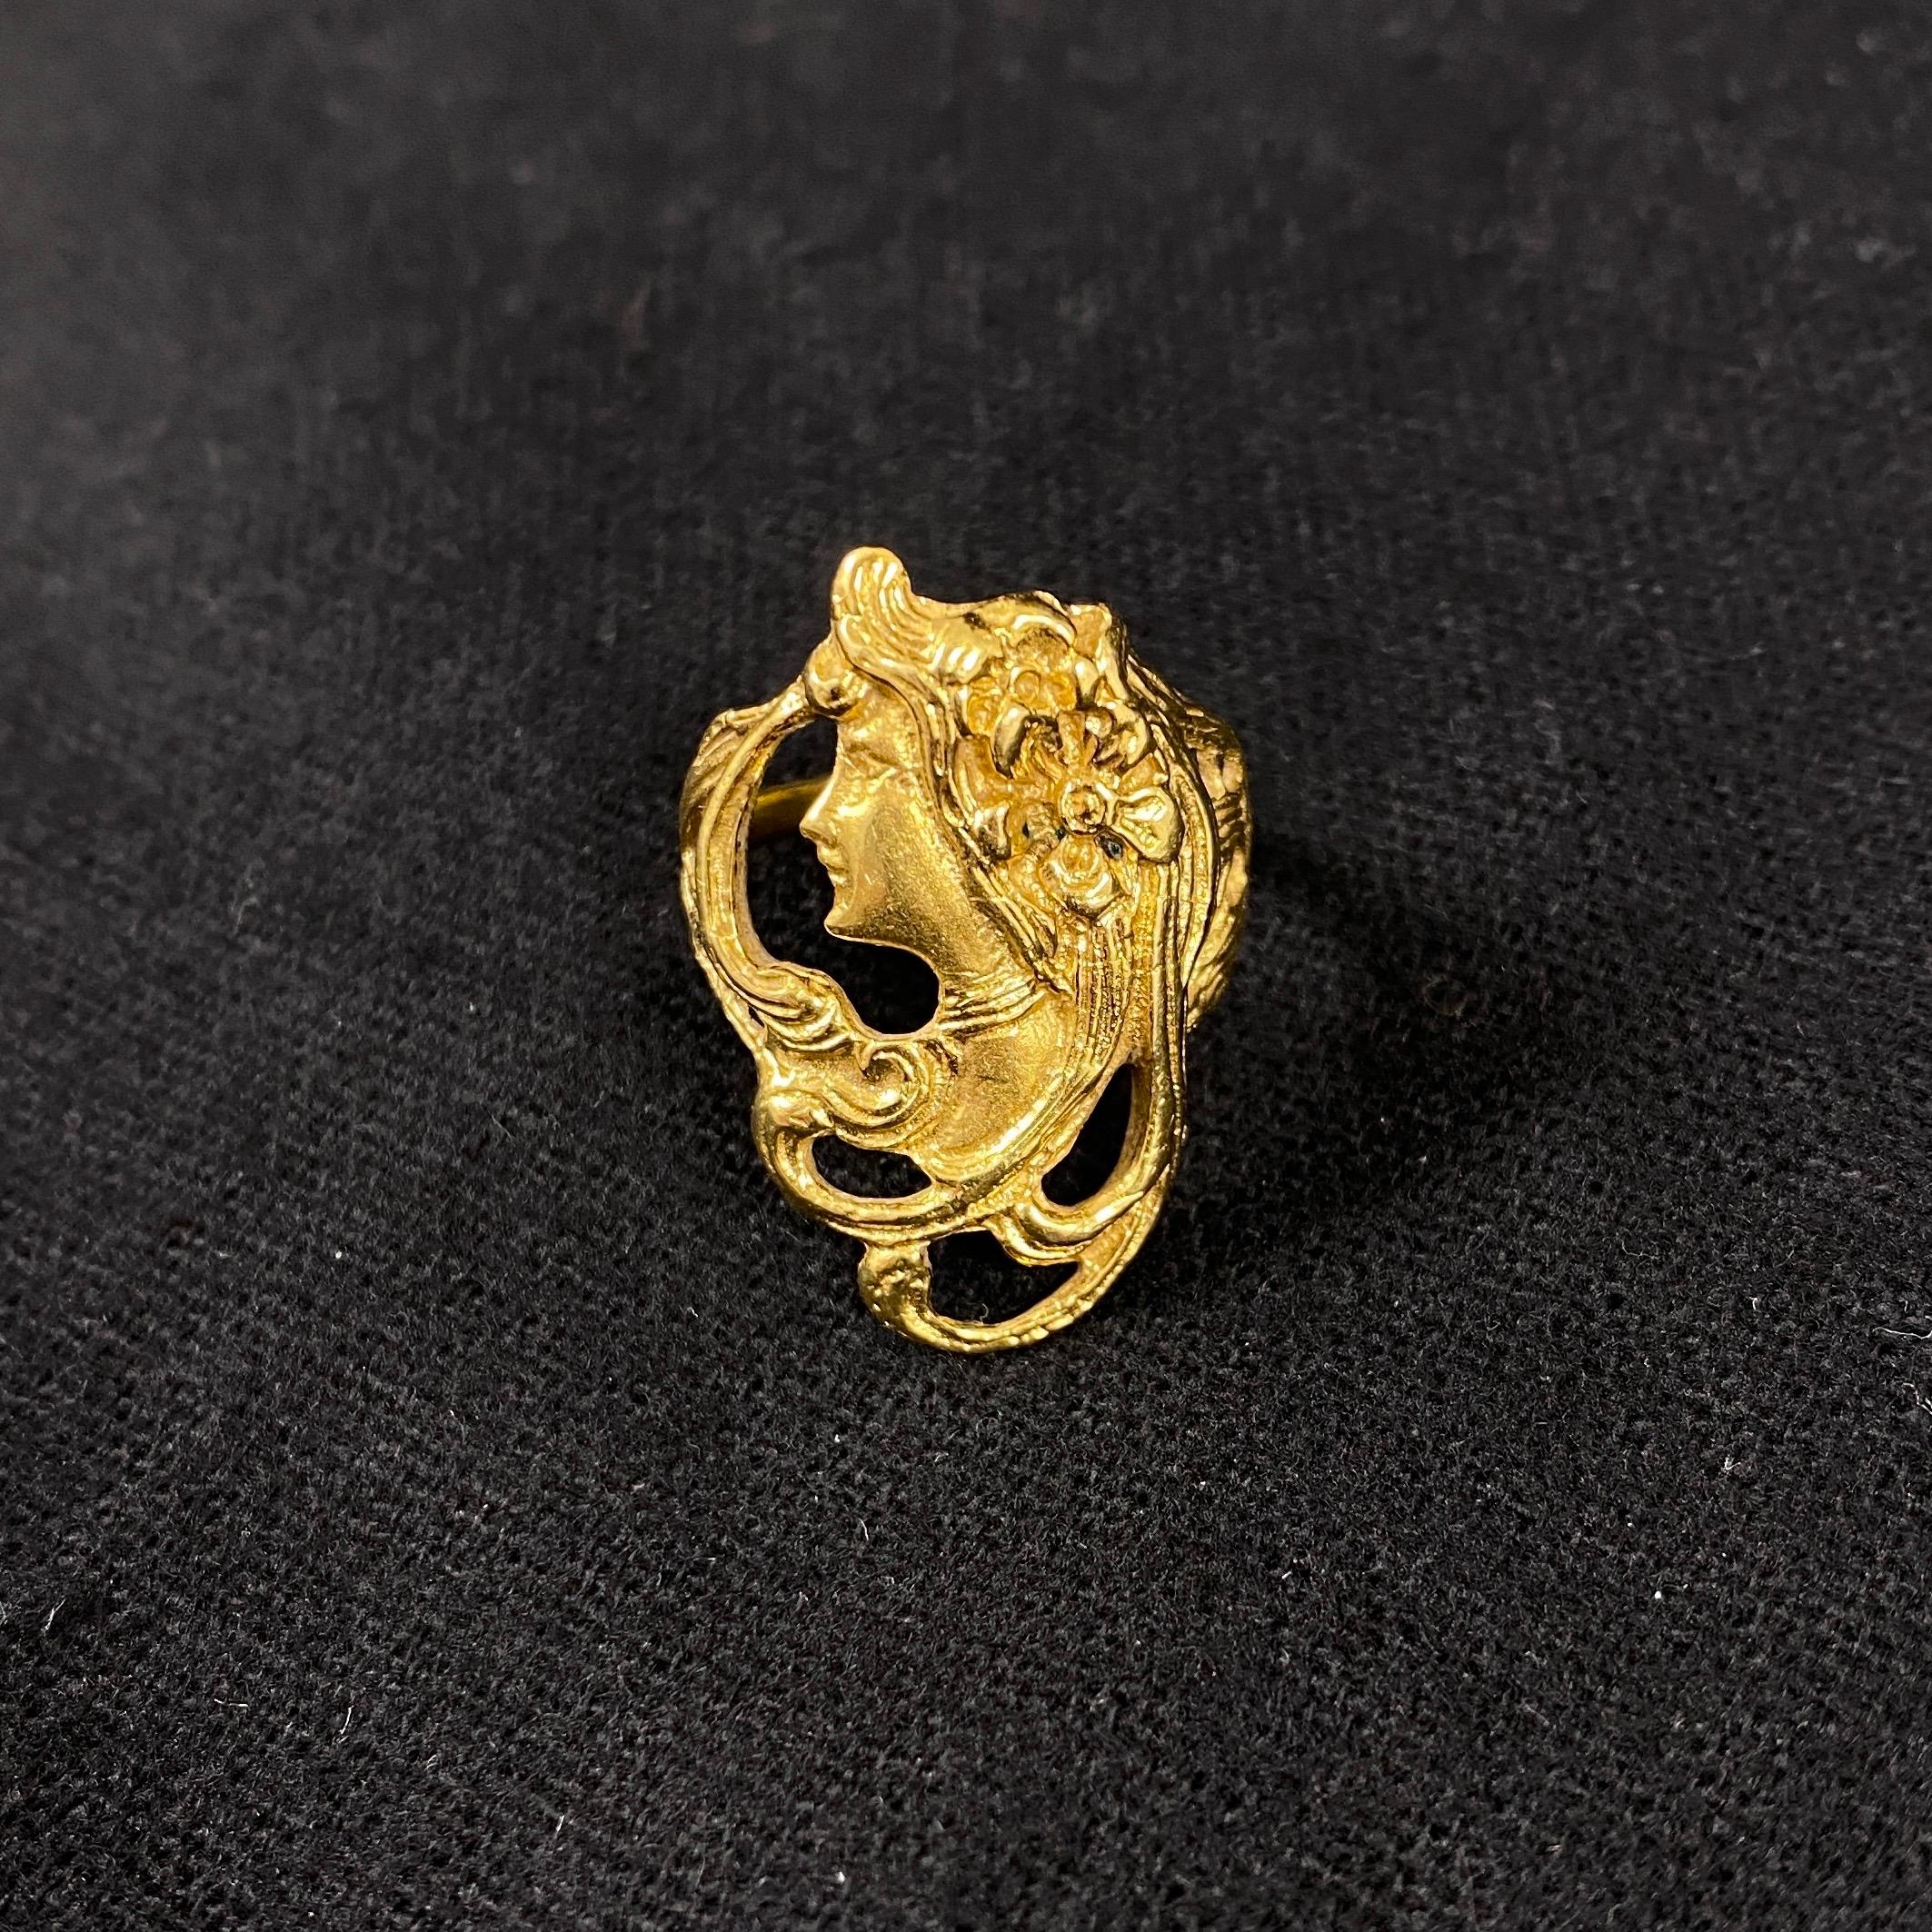 Vintage 1980s Art Nouveau Style Female Figure Openwork Ring Yellow Gold Signed 9